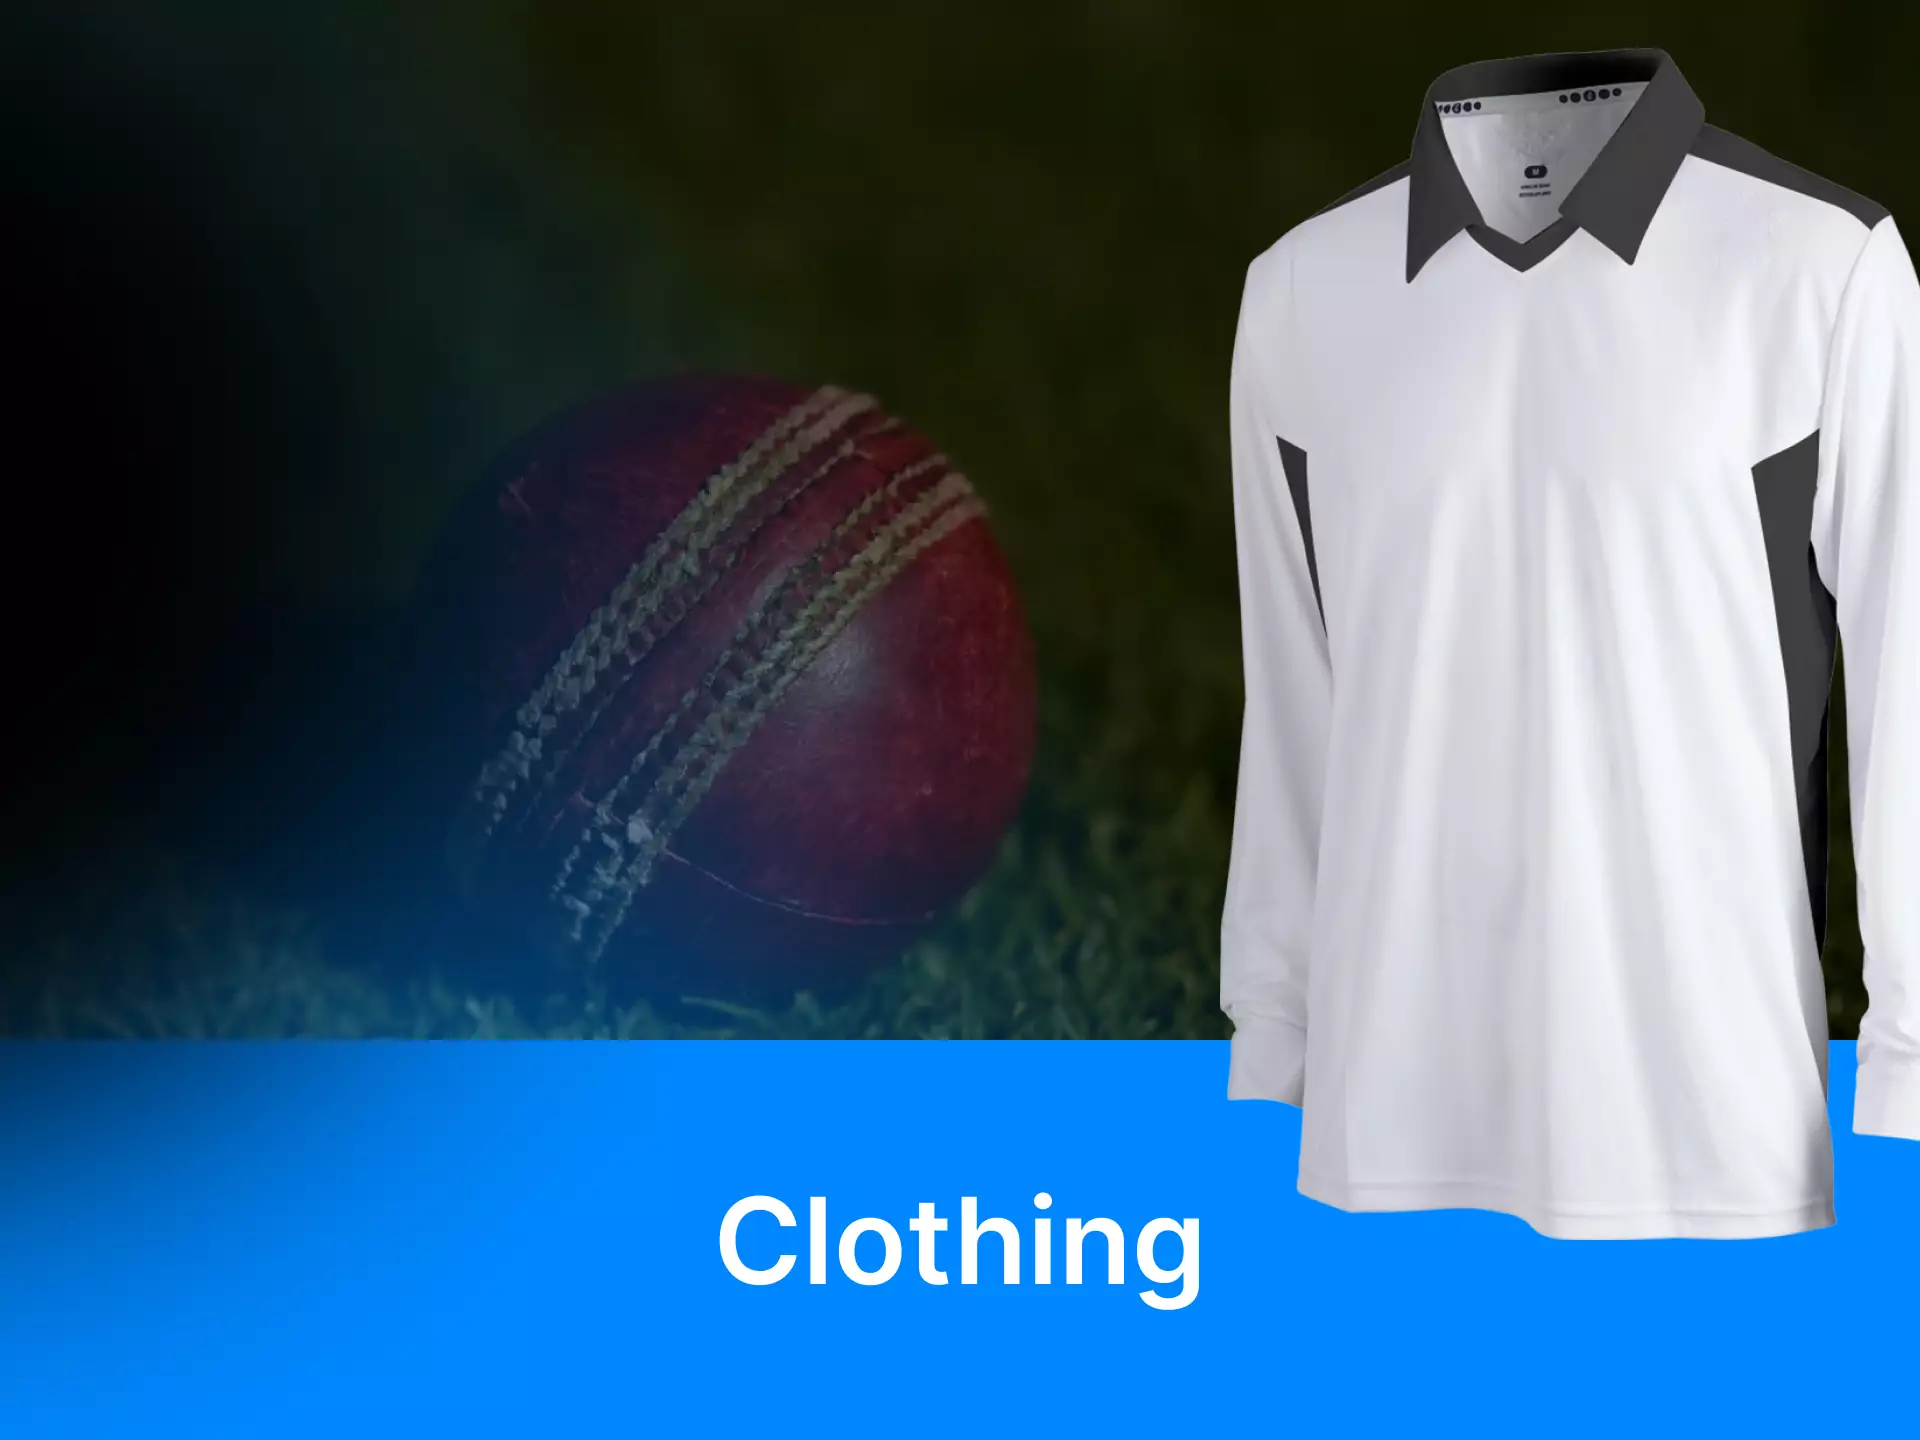 Learn more about the clothes that are made for playing cricket.